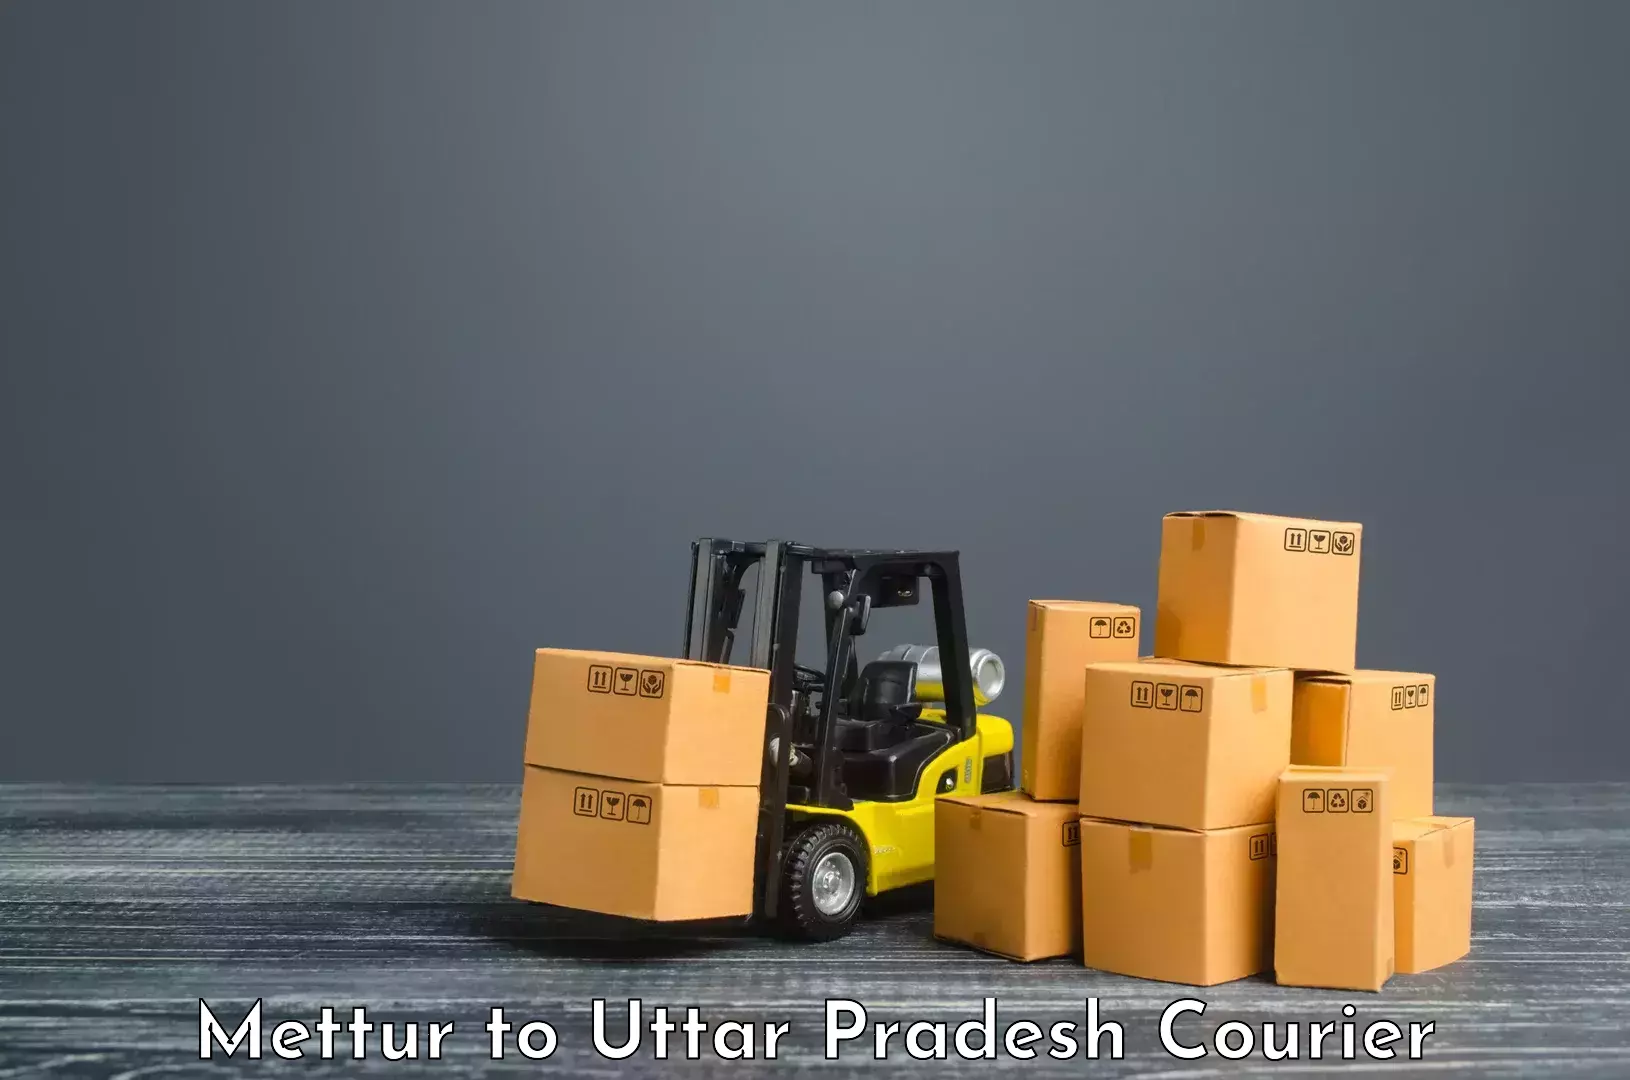 Sustainable courier practices Mettur to Rath